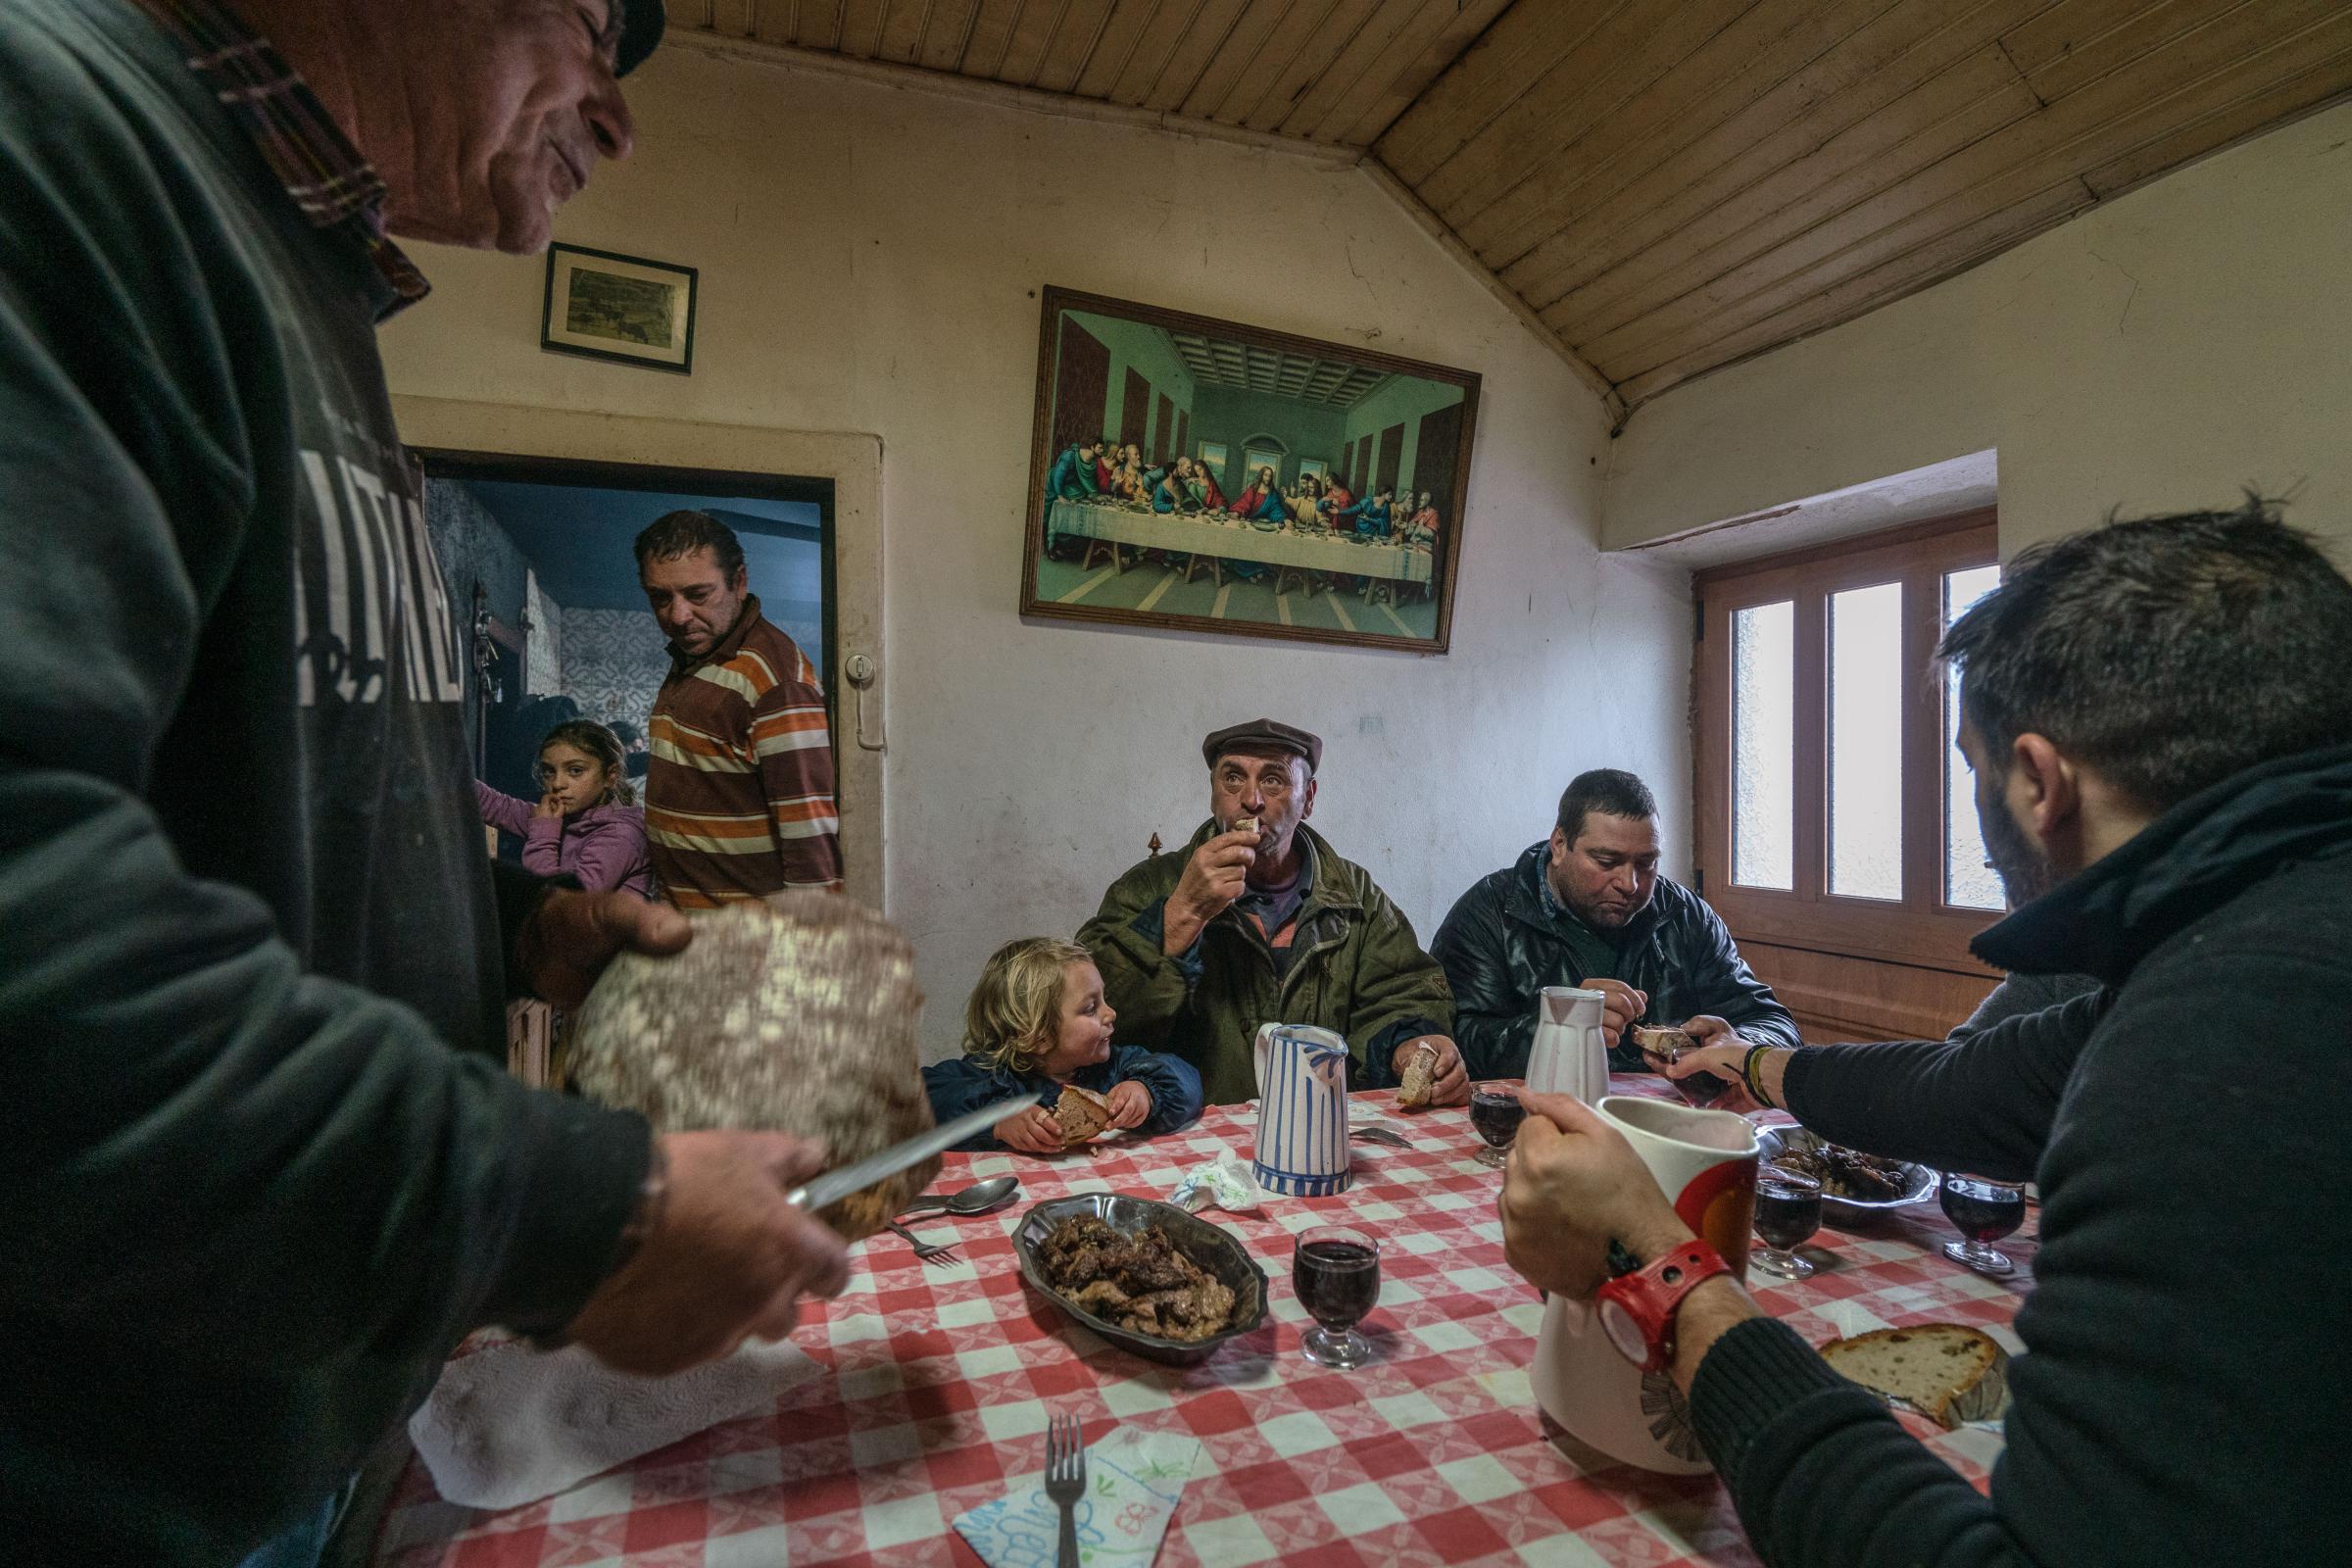 Vilarinho Seco, December 14th, 2019 - Elias Coelho (left) serves homemade bread to his family and neighbors after they all spent the morning...